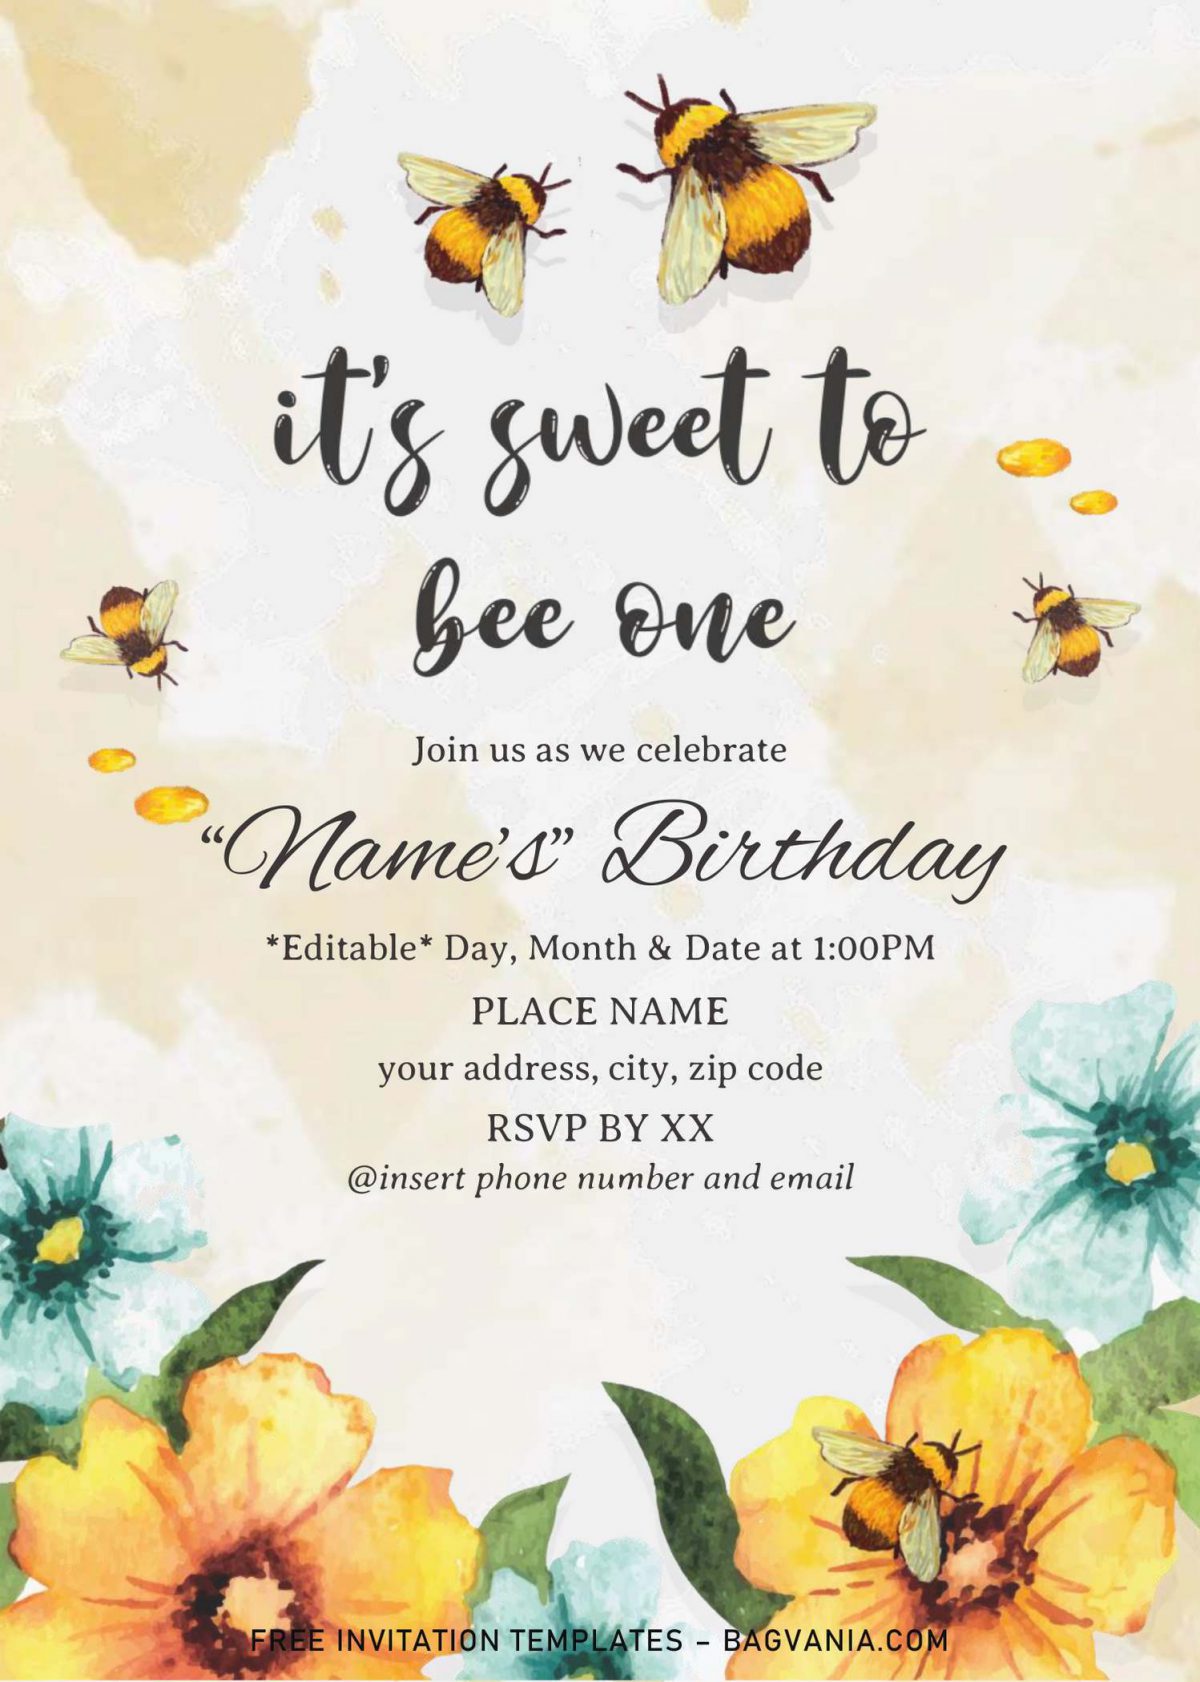 First Bee Day Birthday Invitation Templates - Editable .Docx and has portrait orientation card design